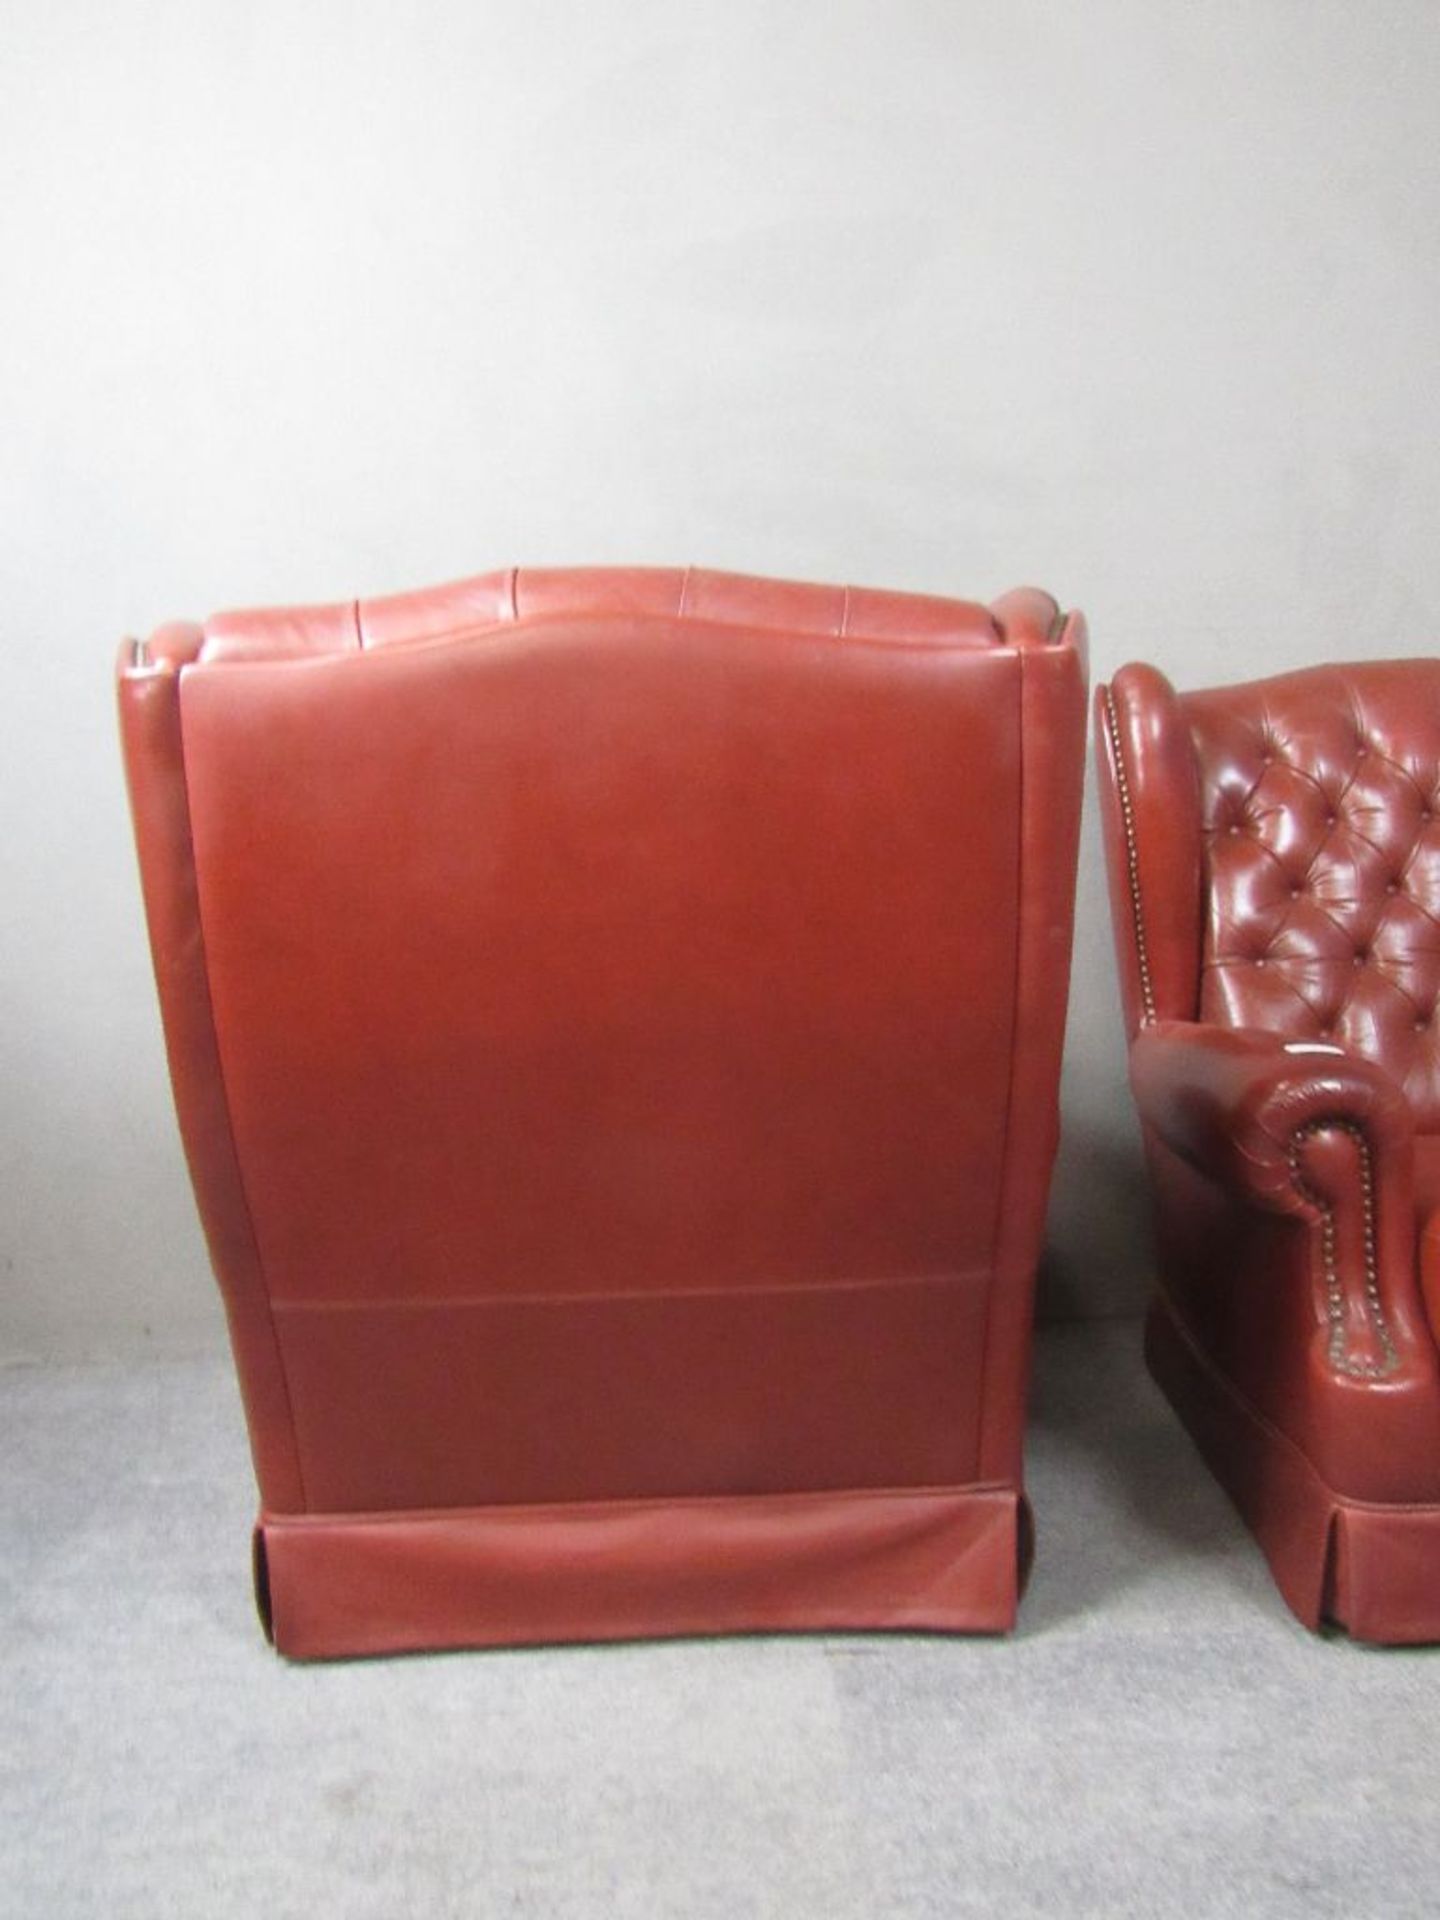 2 Chesterfield Sessel weinrotes Leder altersbedingte Patina - Image 7 of 9